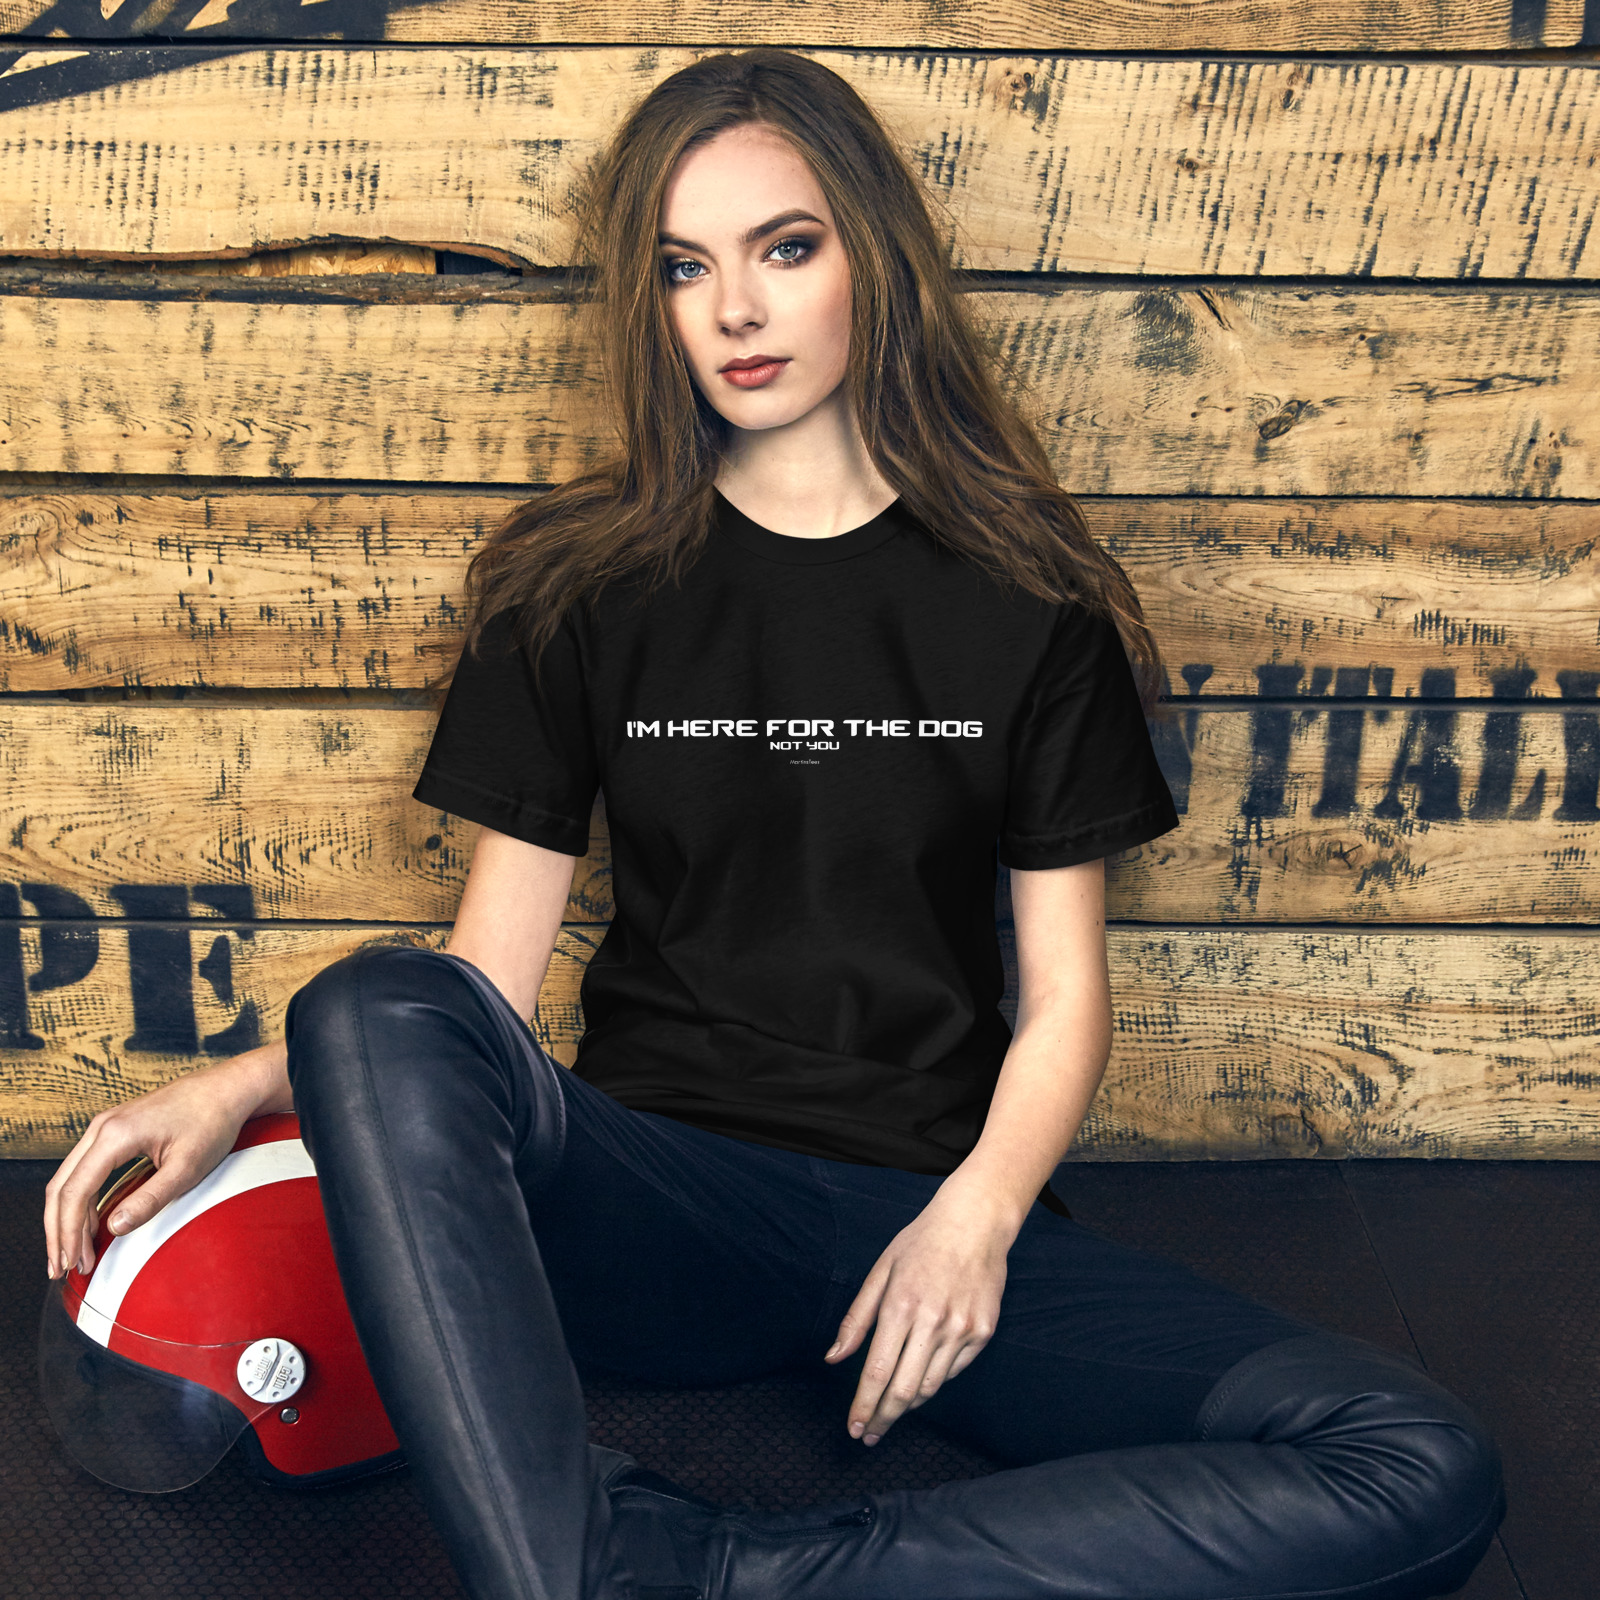 T-shirt: I'M HERE FOR THE DOG - NOT YOU